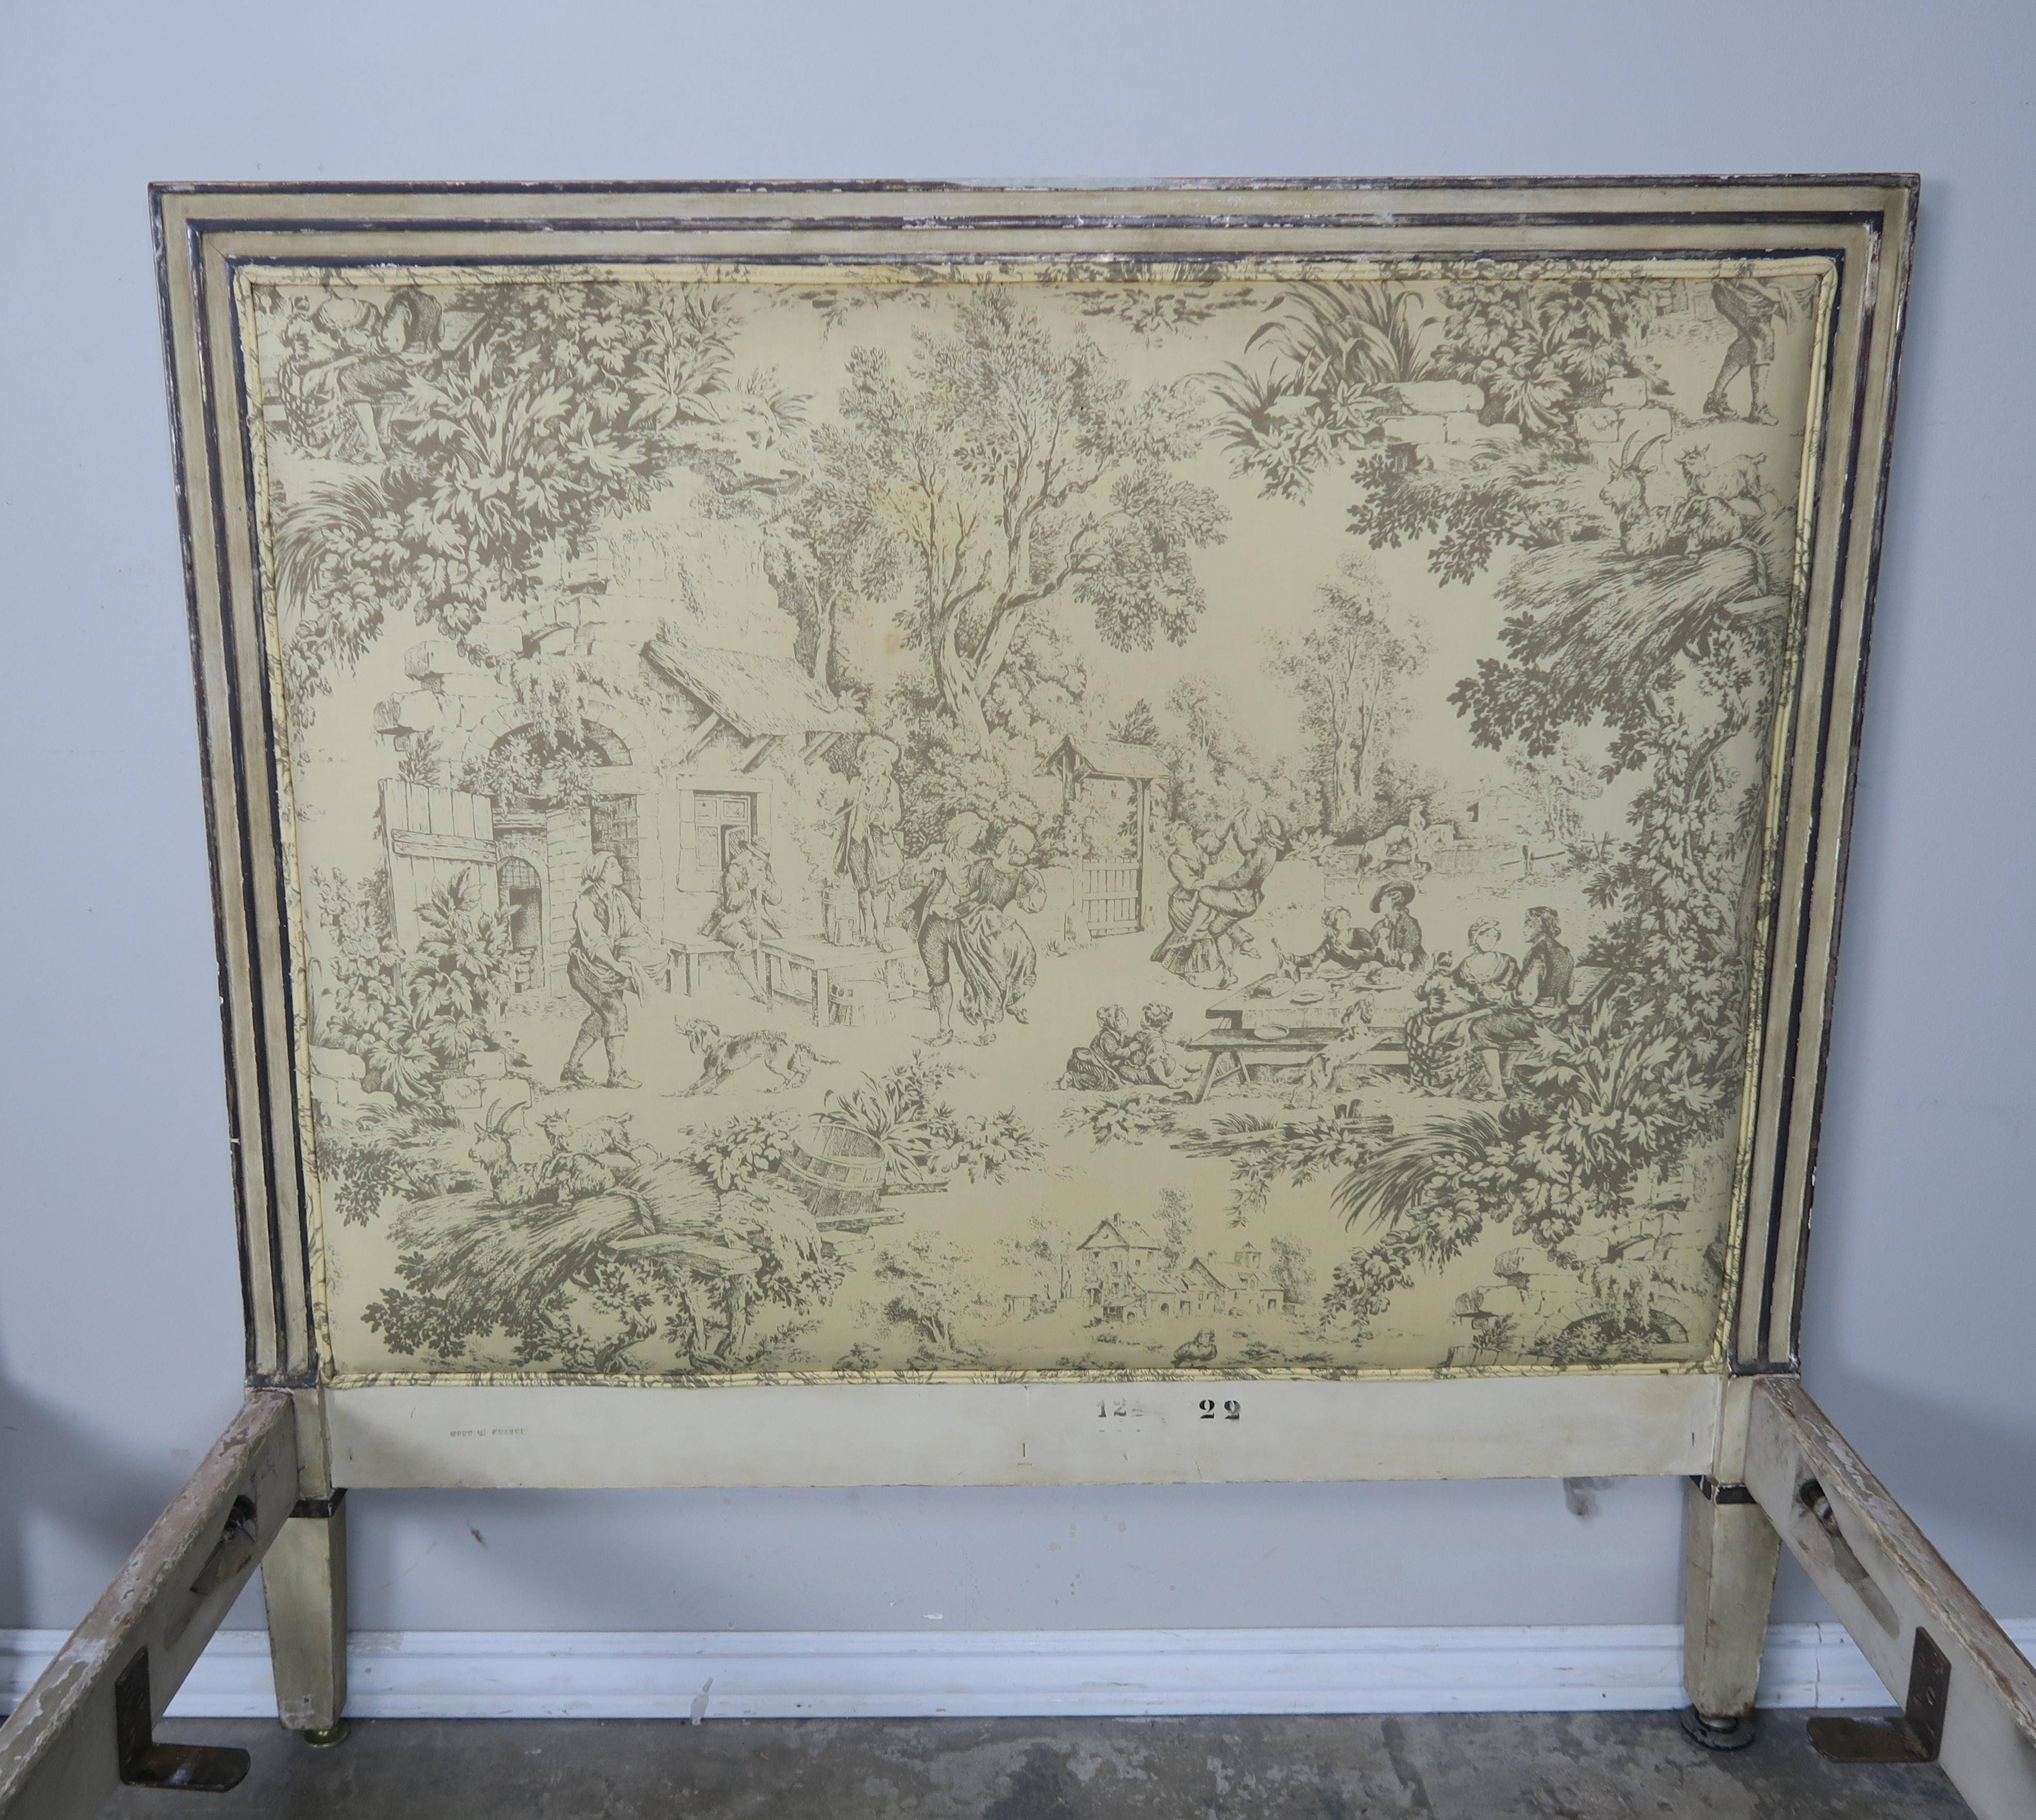 Pair of French painted Louis XVI style bed frames upholstered in vintage printed toile fabric with double self cord detailing. The beds include headboards, footboards, and side rails. Stamped 